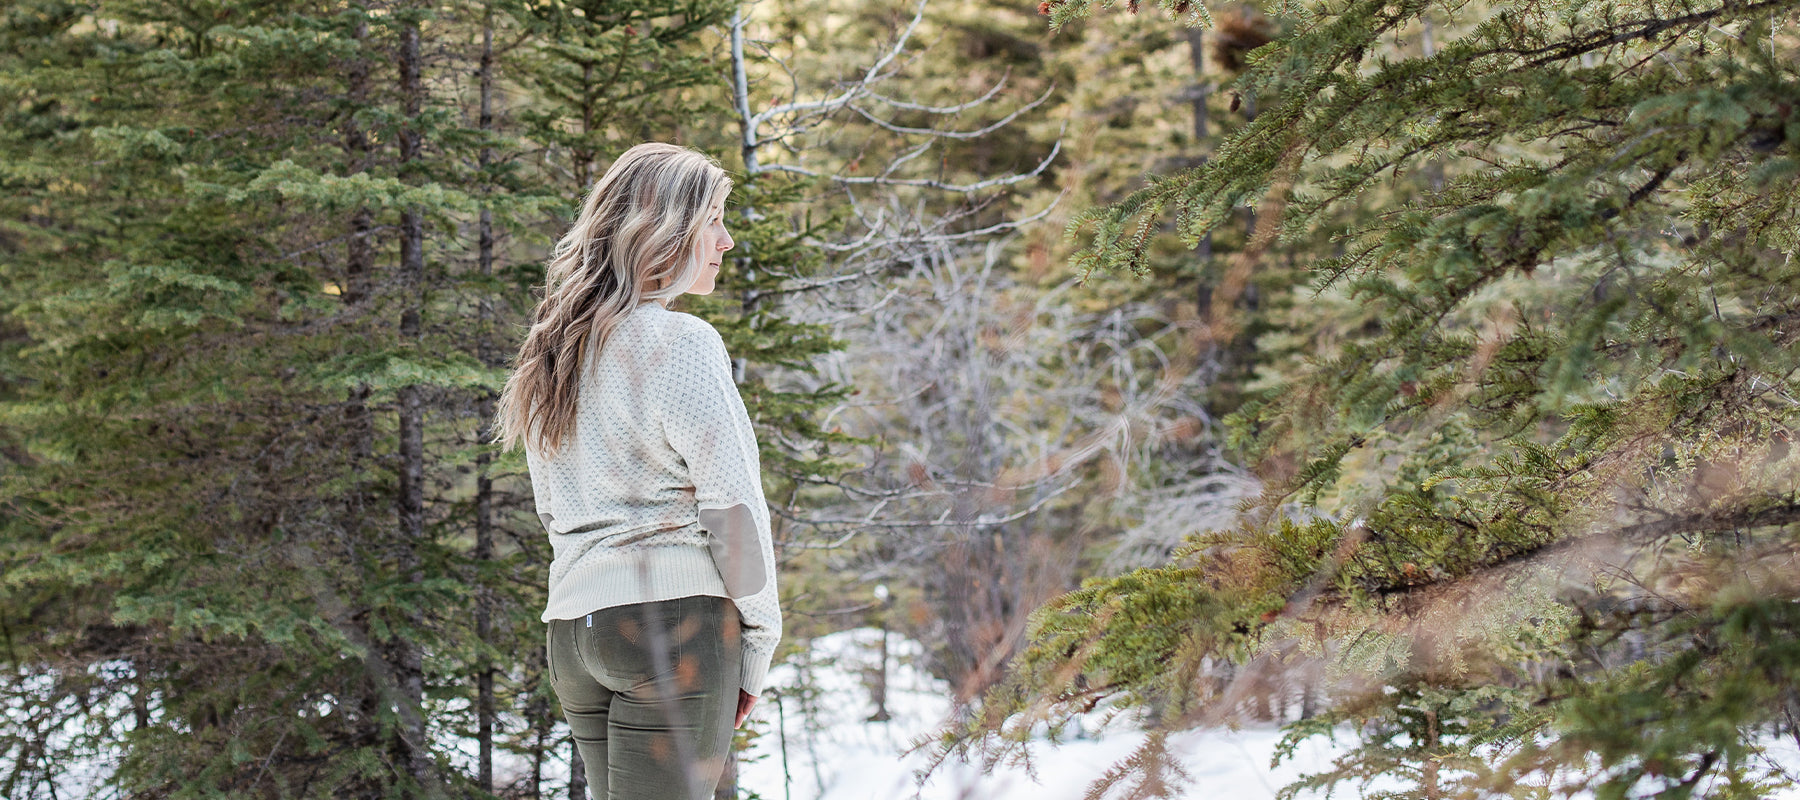 Forest Bathing - something to add to your self-care routine